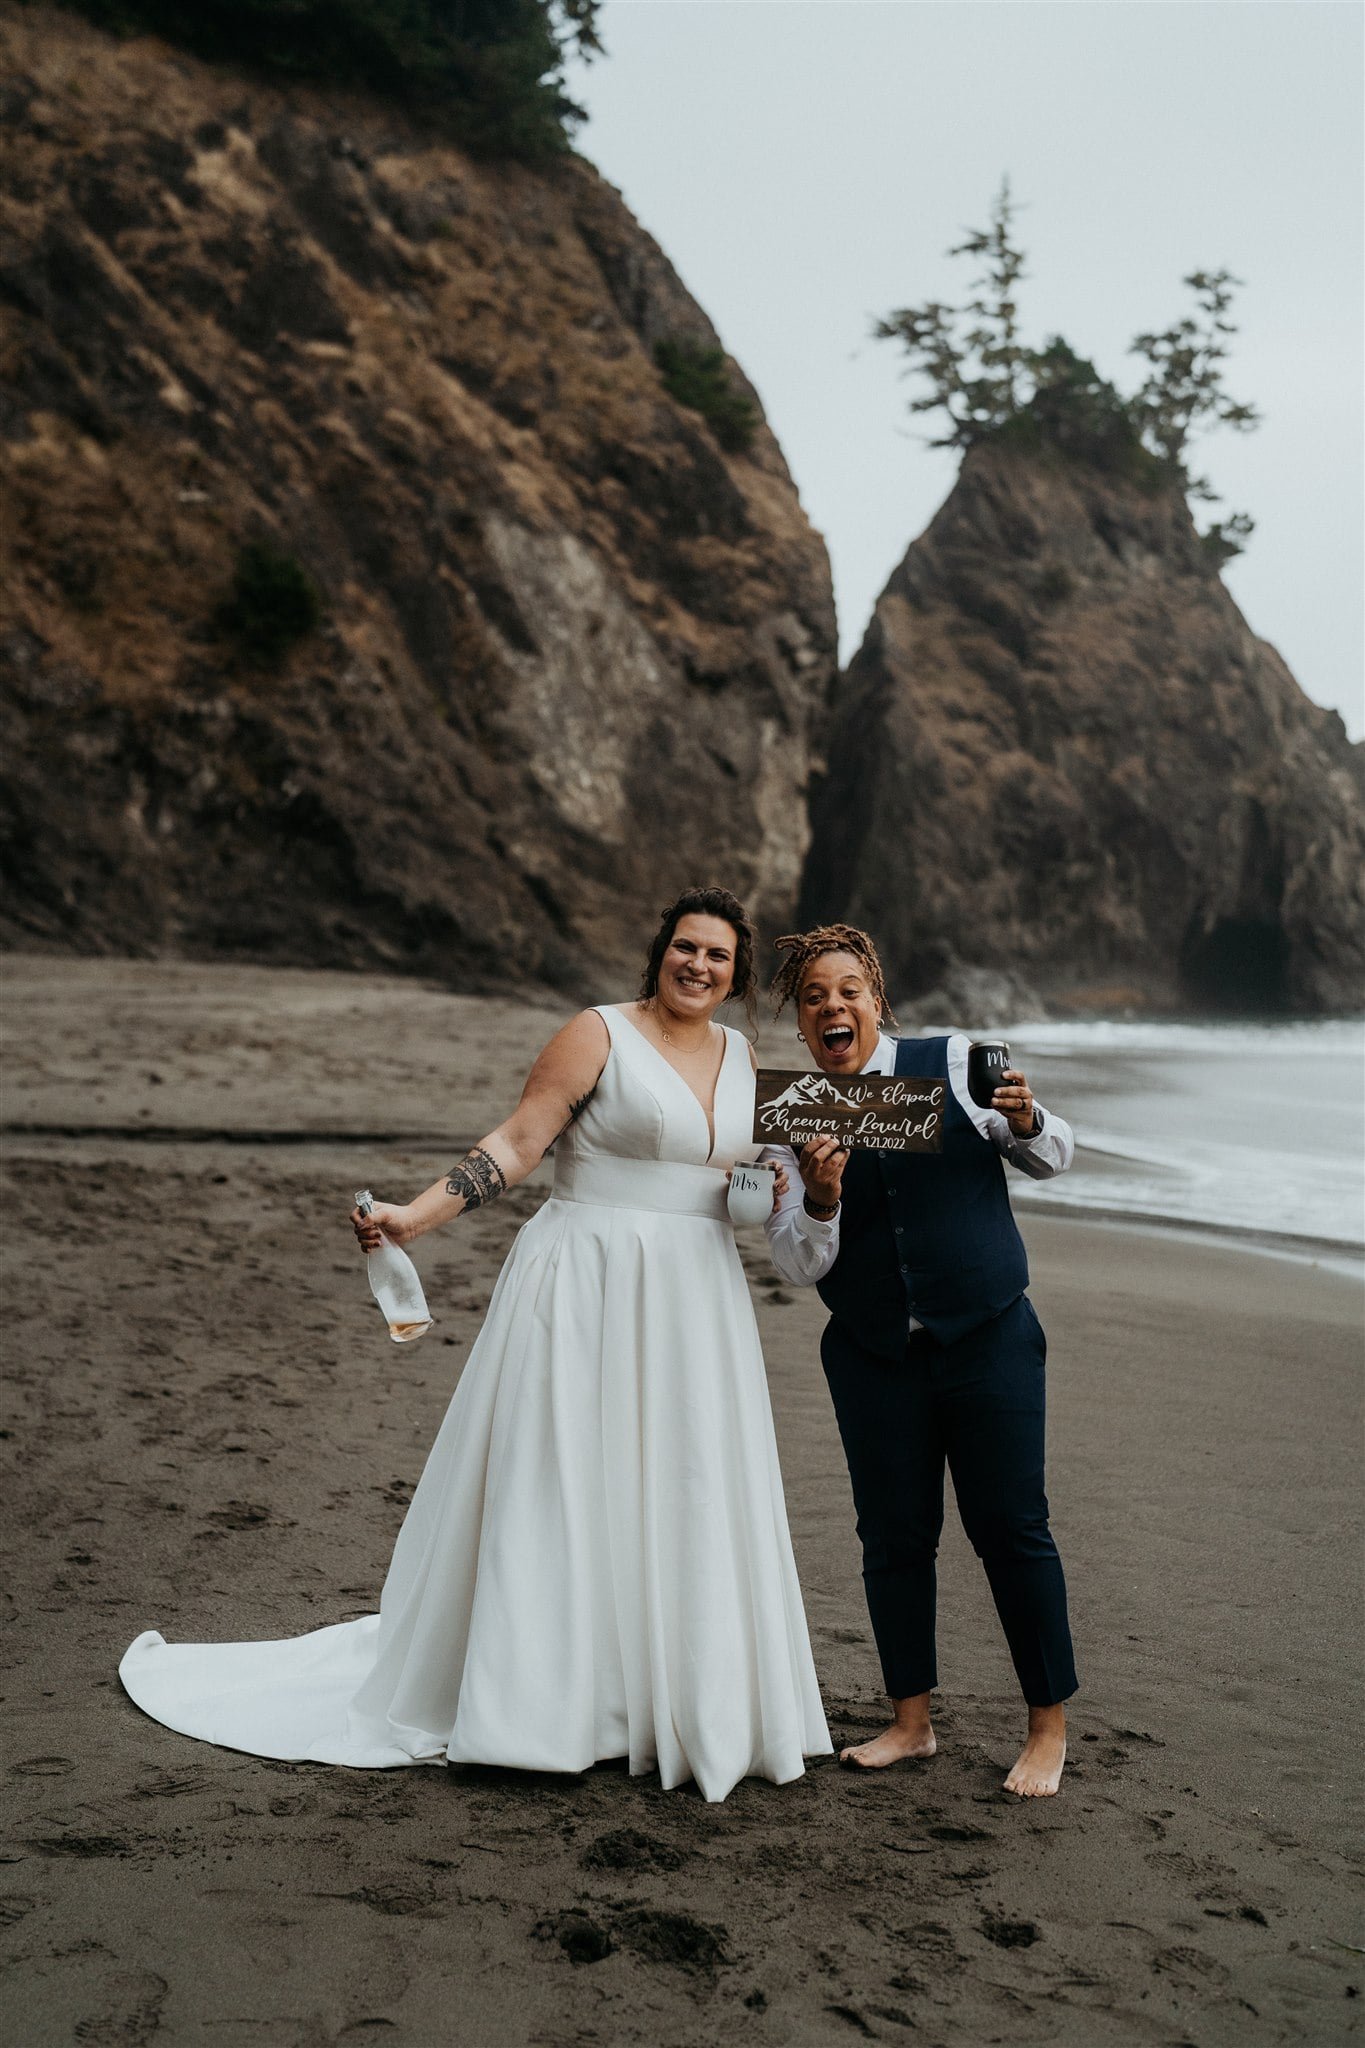 Brides hold champagne and custom sign that says "We eloped"